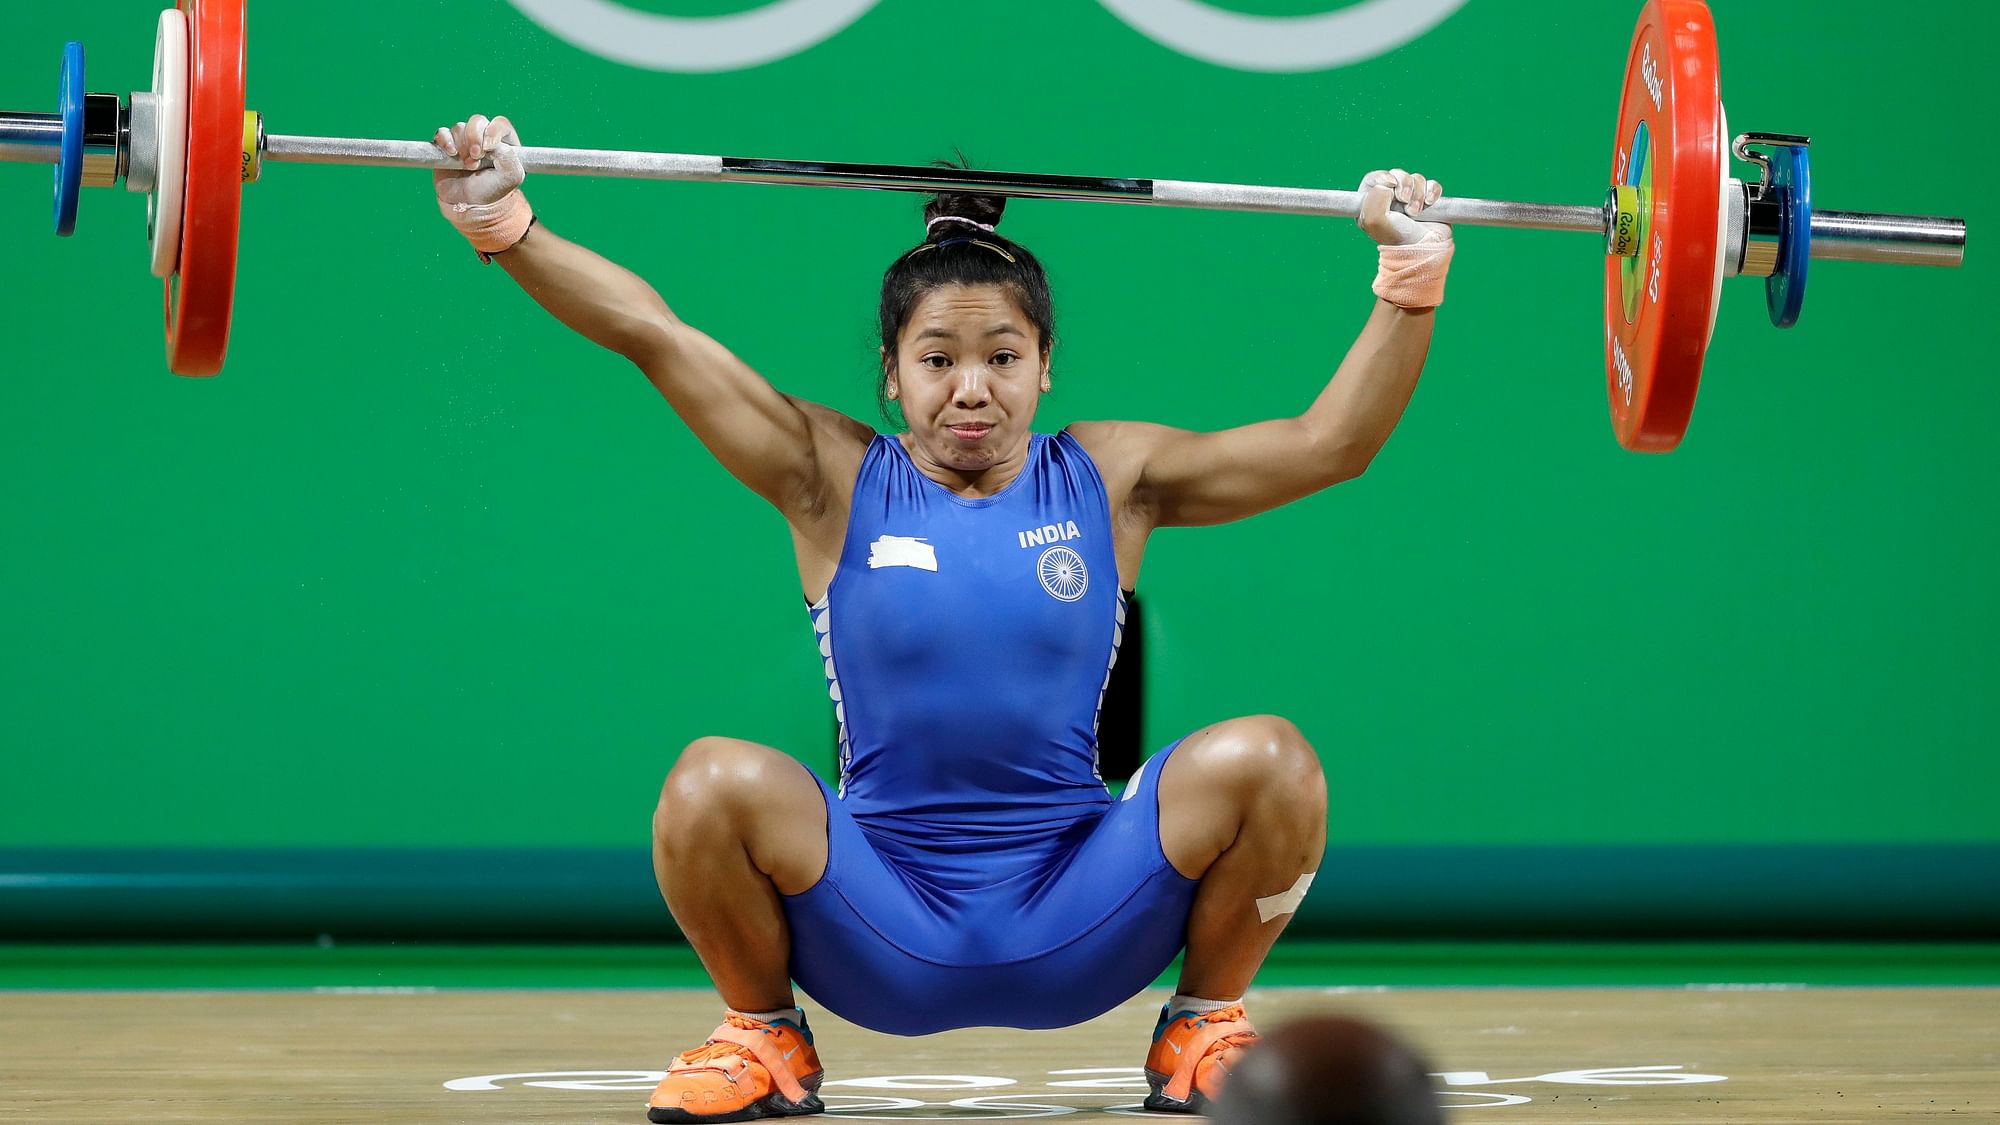 Mirabai won the gold in the 48kg category at the 2017 World Weightlifting Championships.